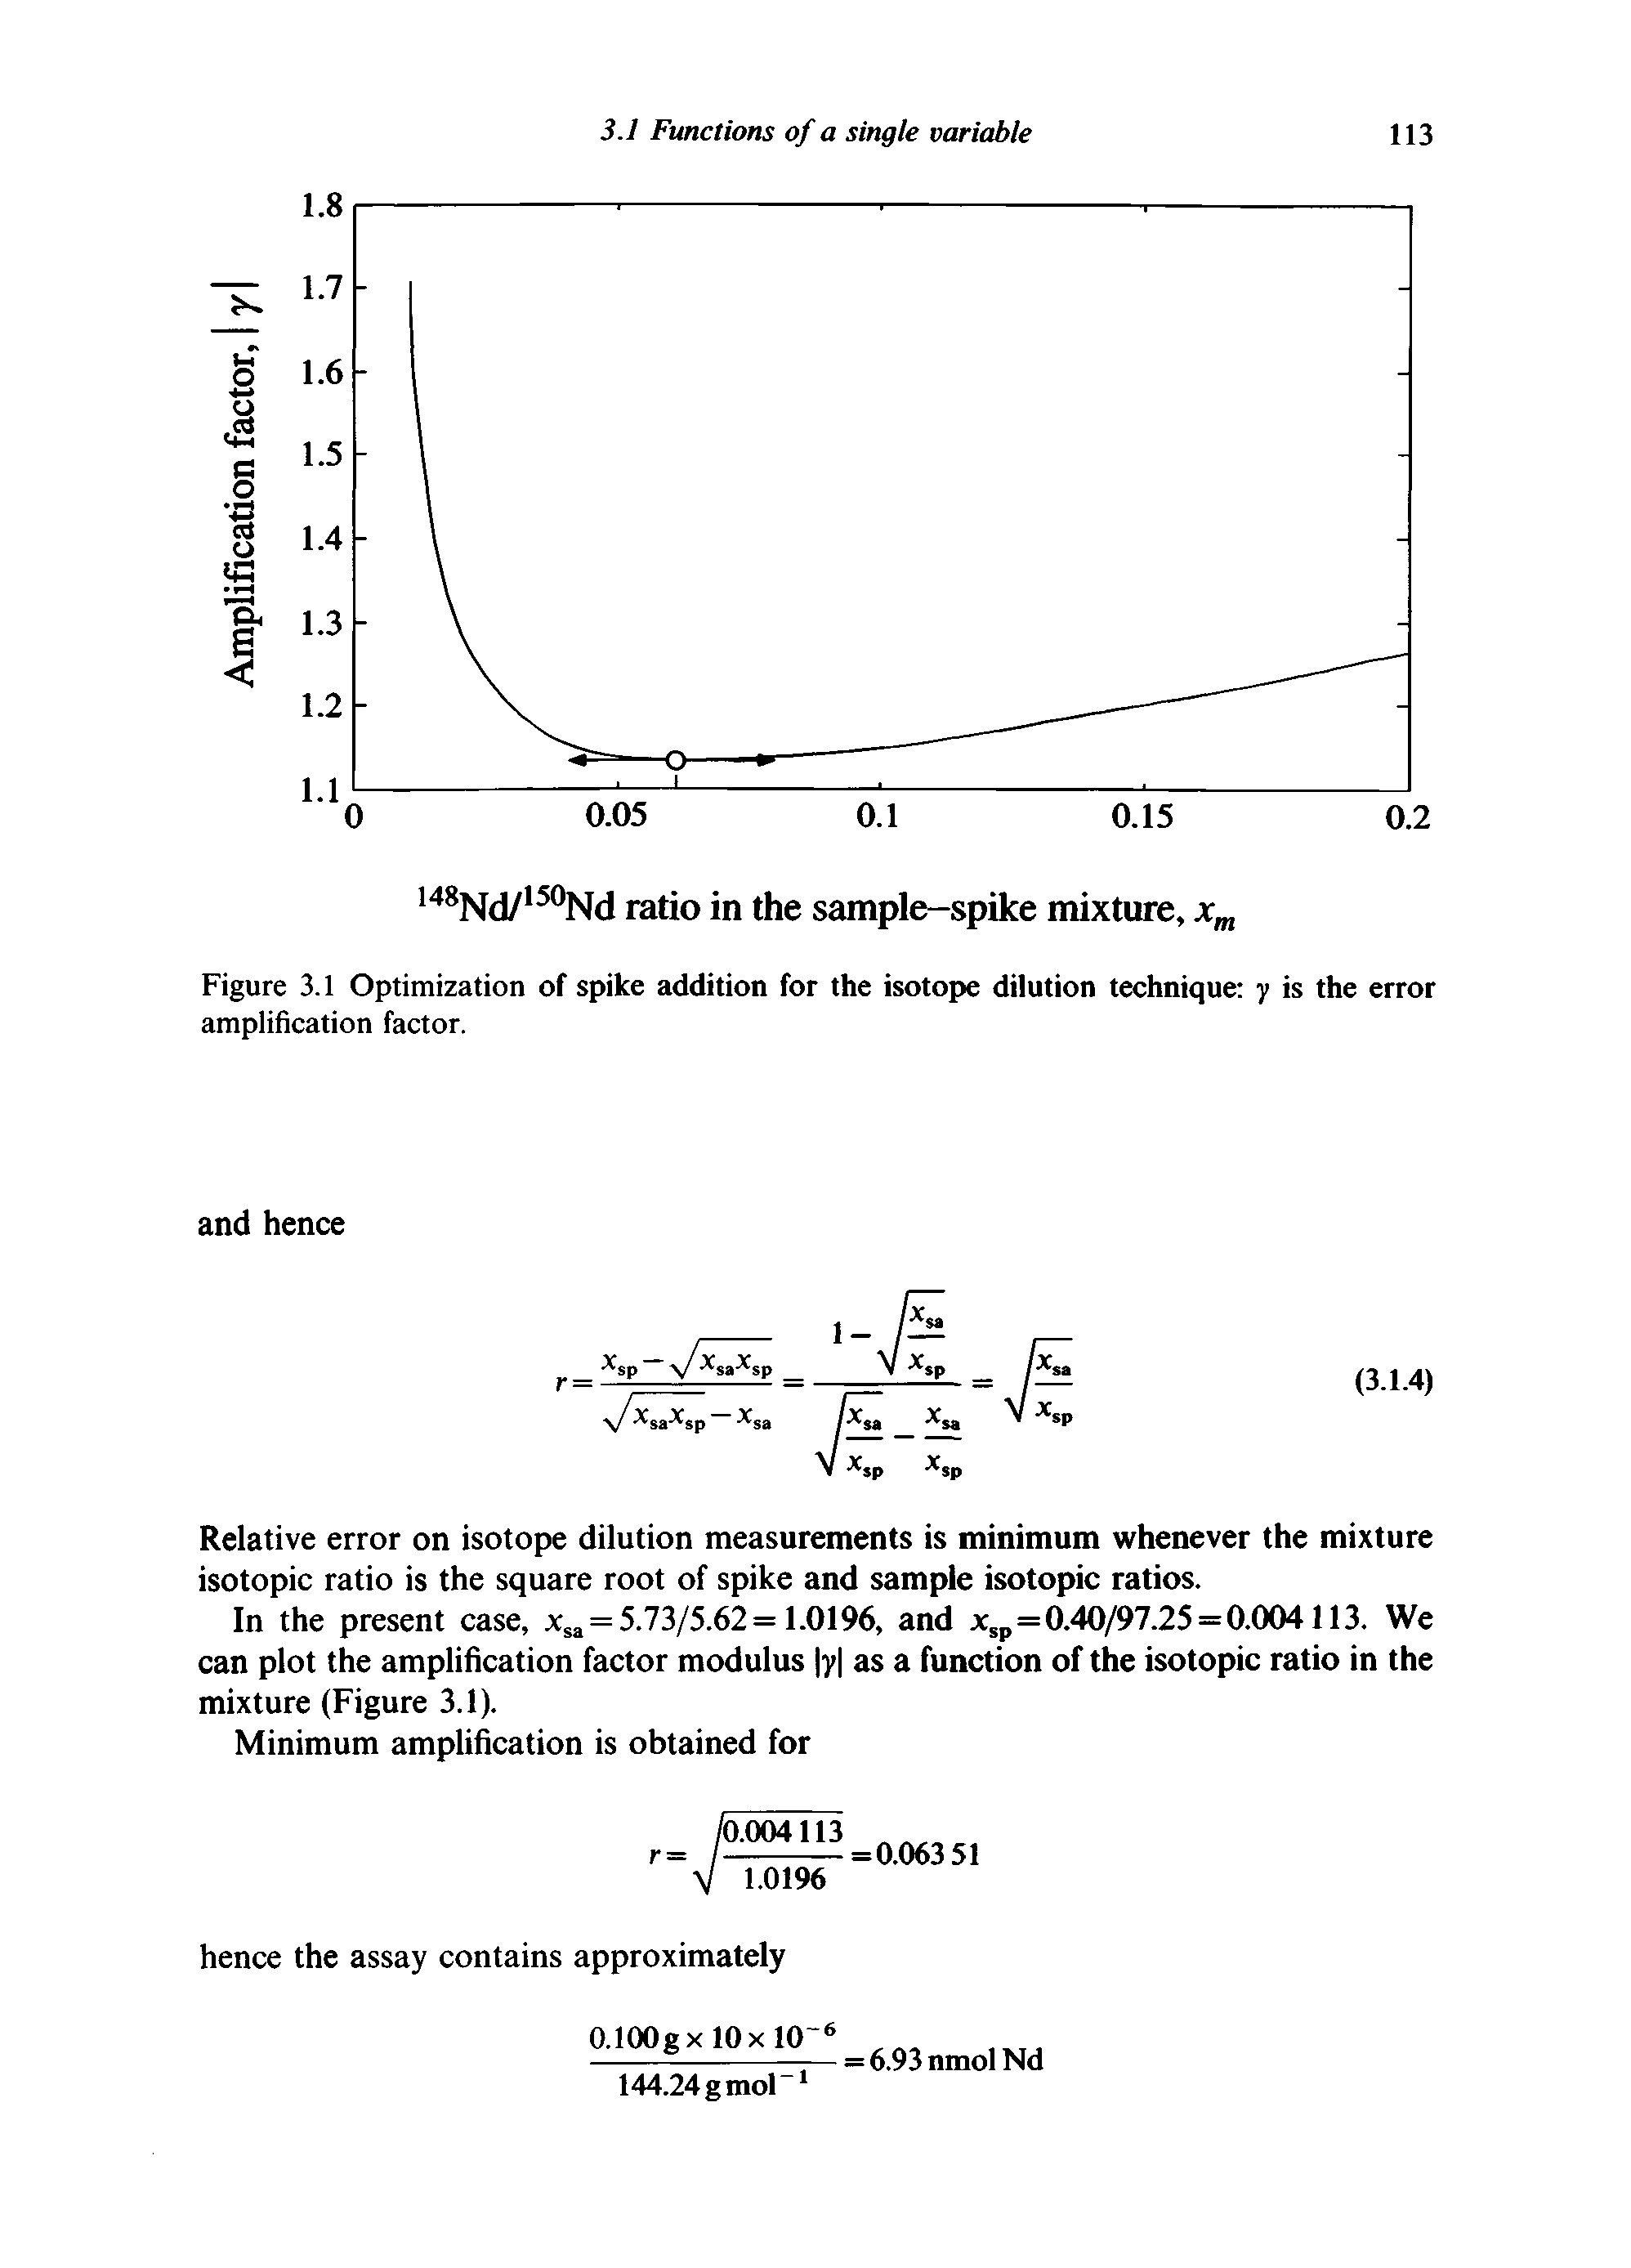 Figure 3.1 Optimization of spike addition for the isotope dilution technique y is the error amplification factor.